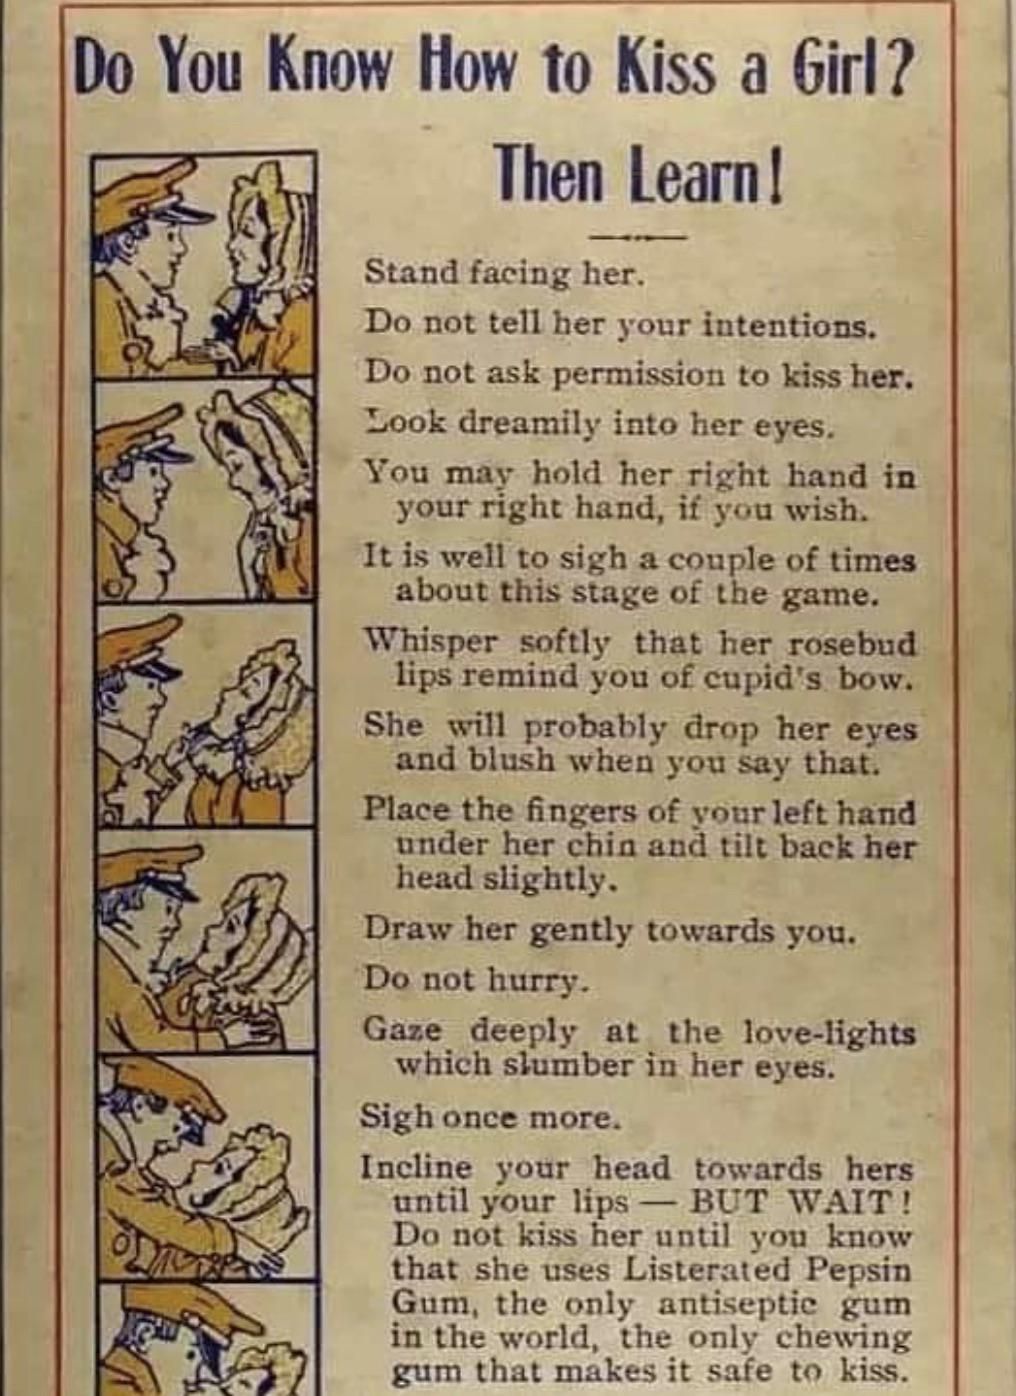 Detailed instructions on how to kiss a girl from 1911.